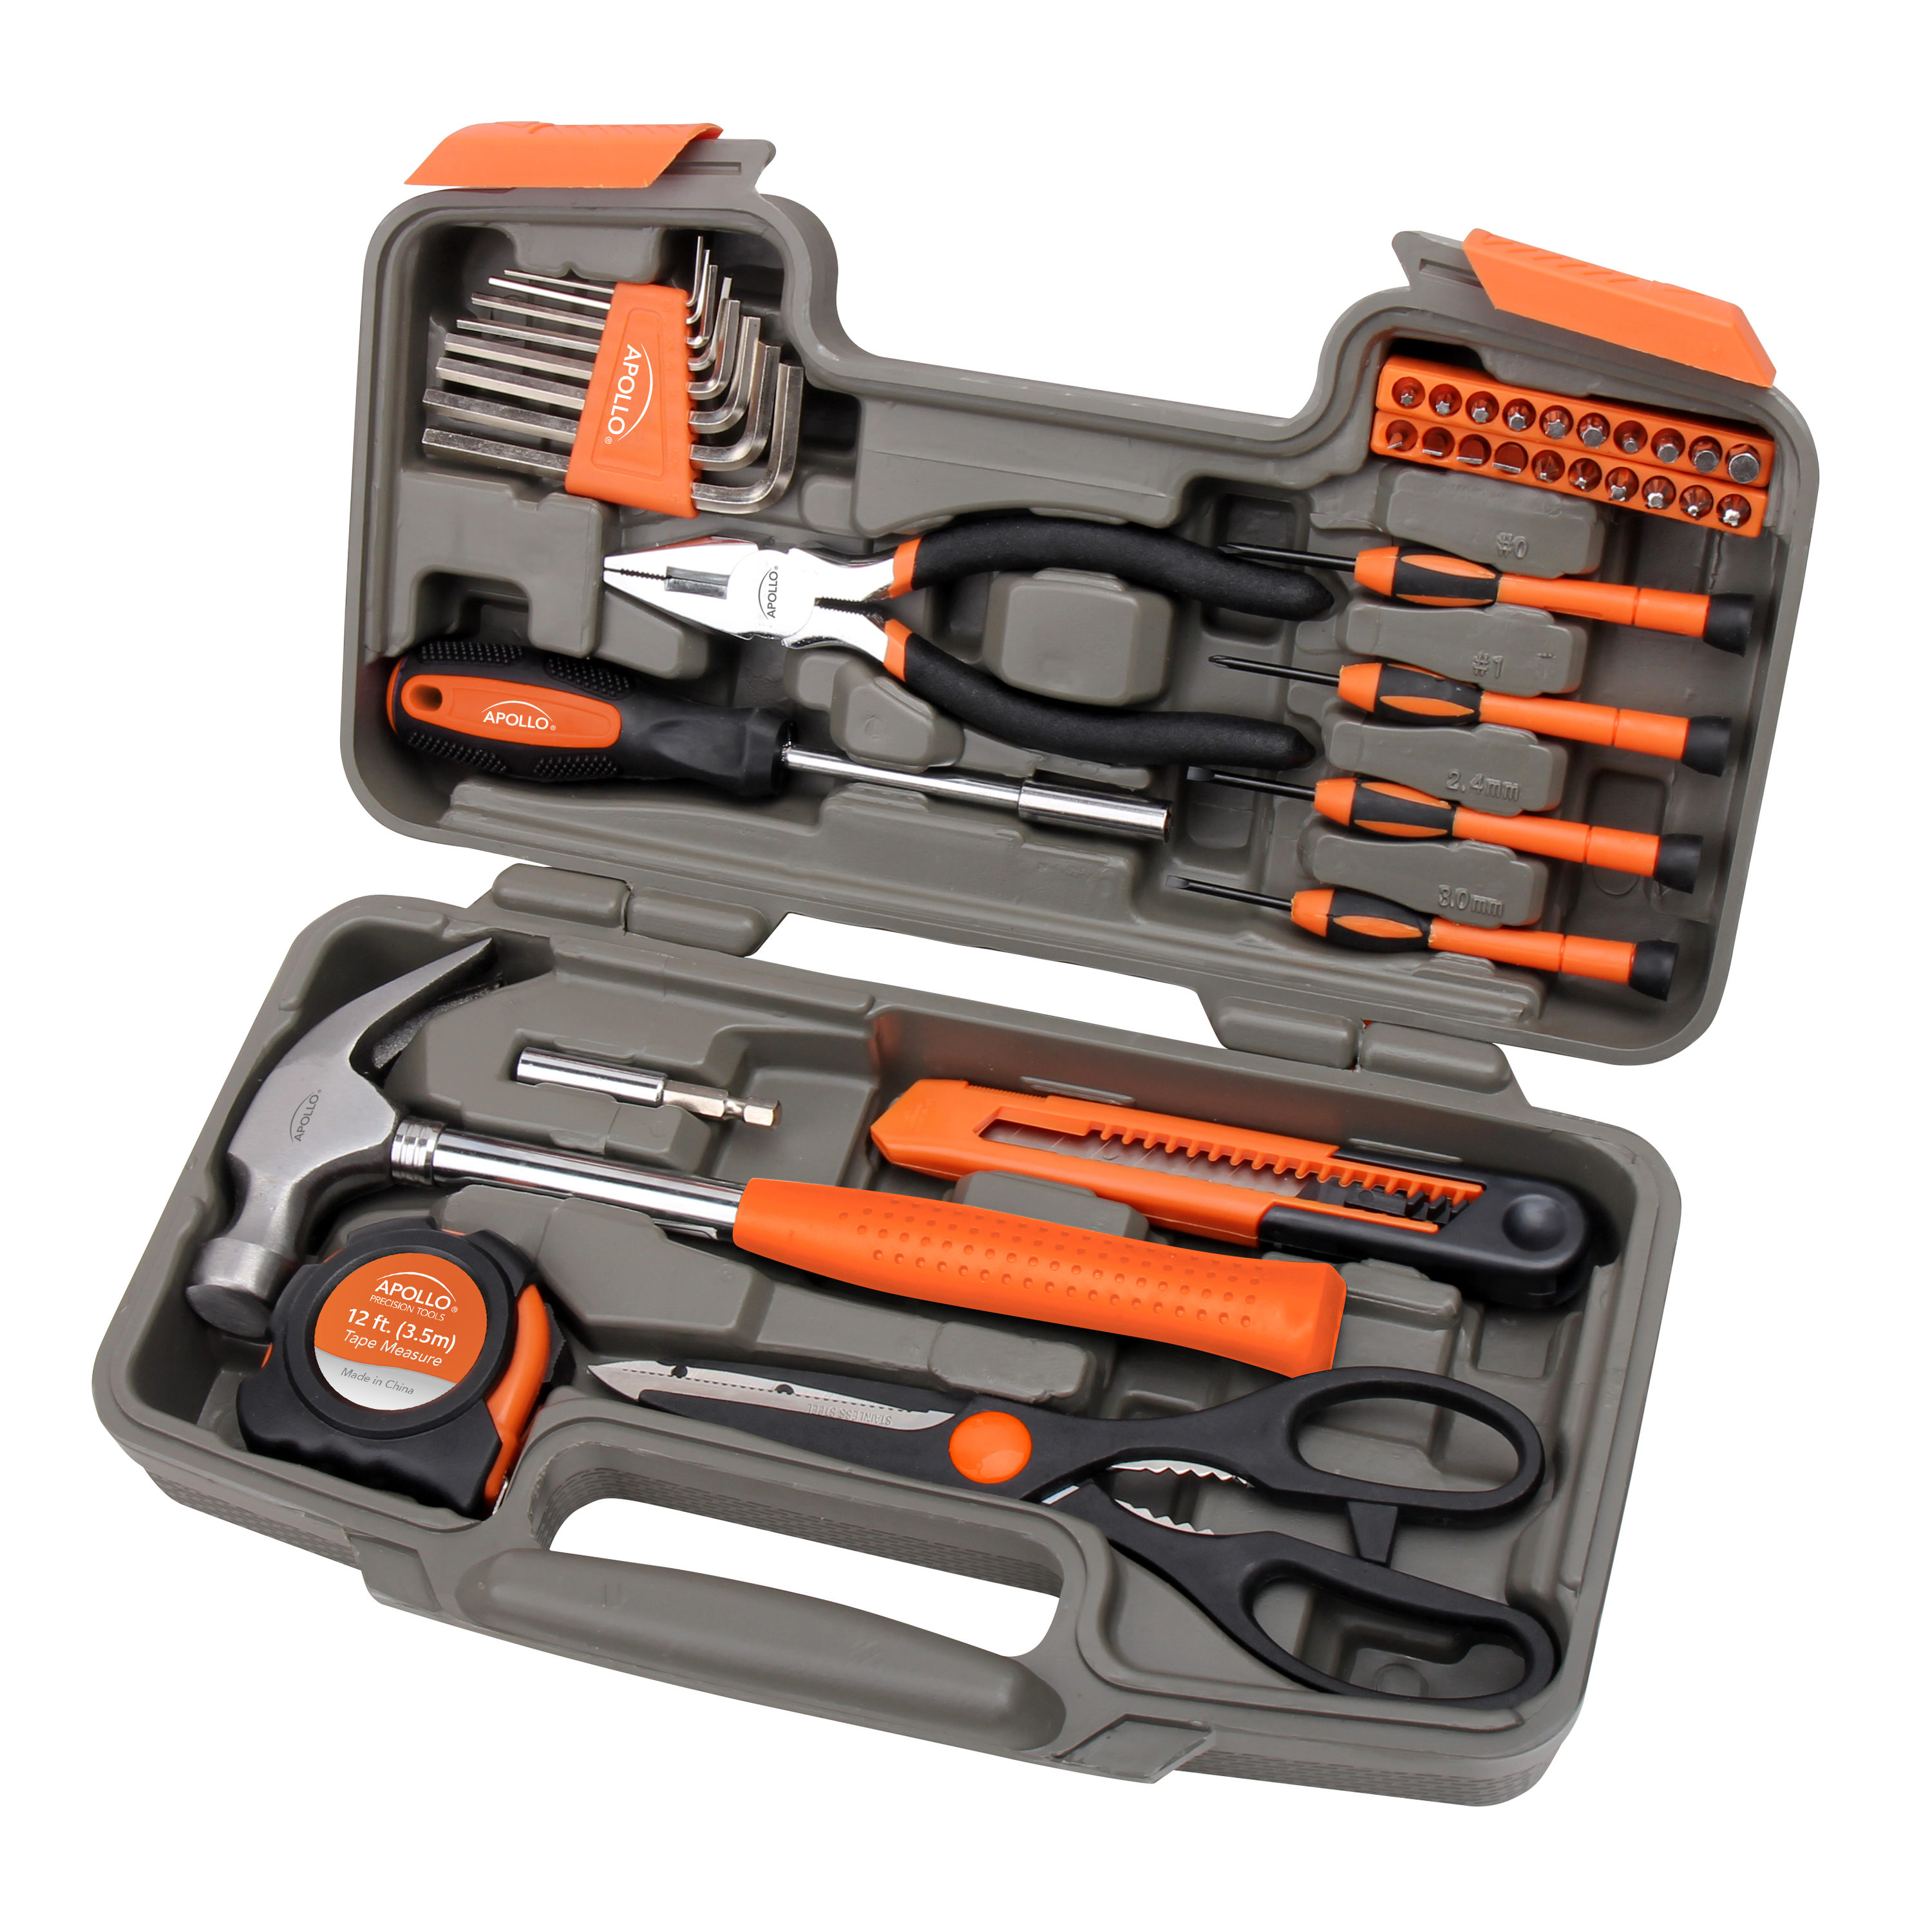 CRAFTSMAN 57-Piece Household Tool Set with Hard Case